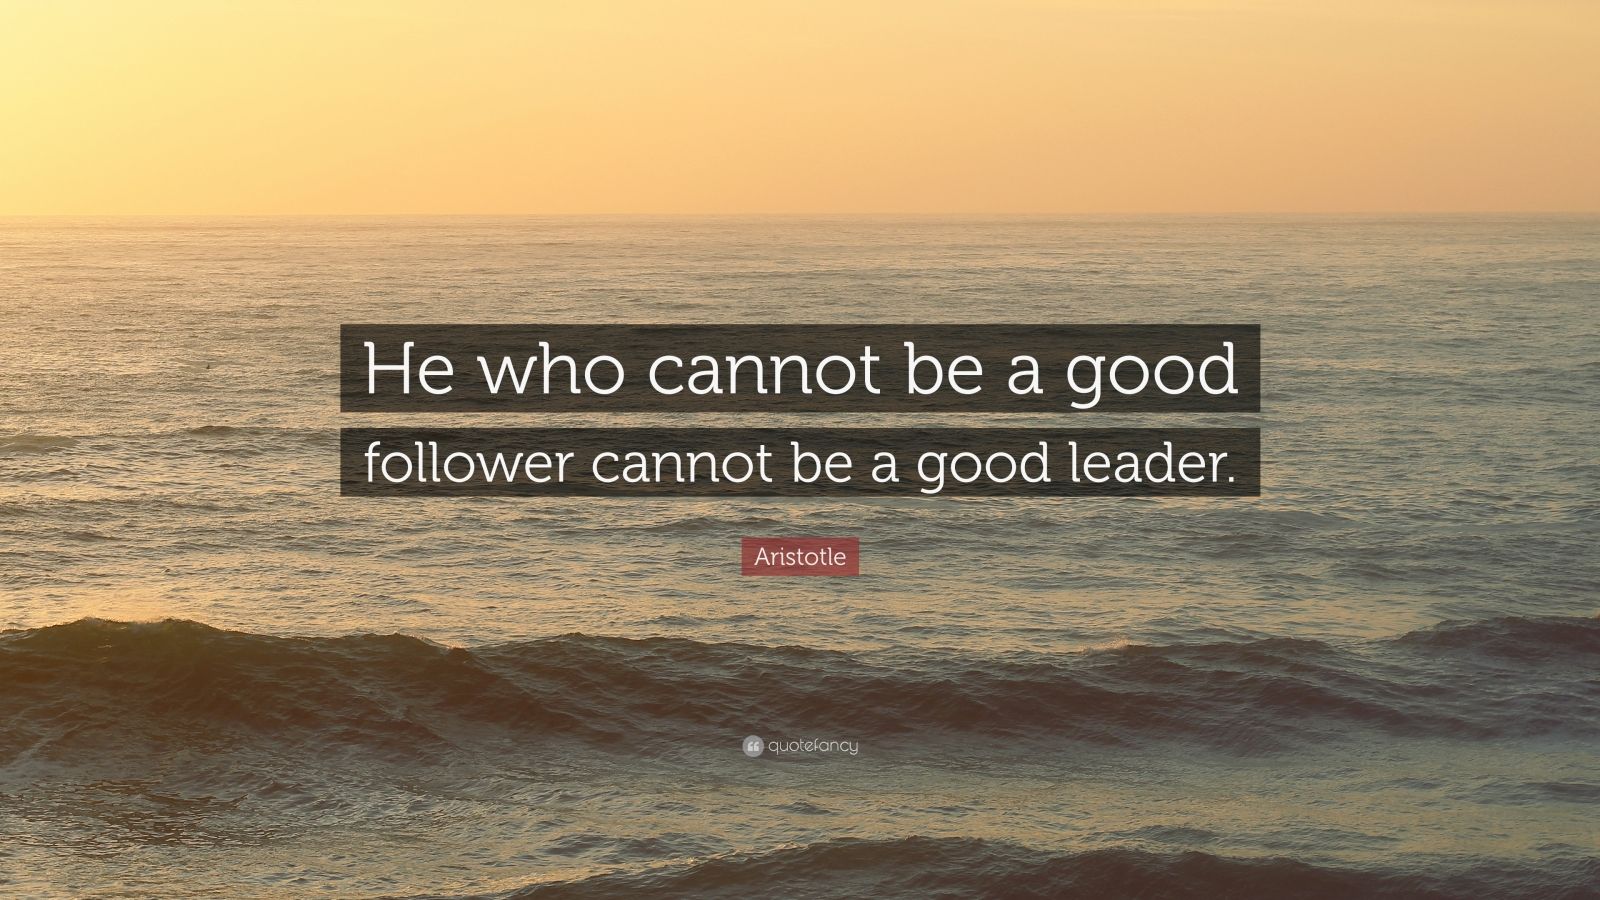 Aristotle Quote: “He who cannot be a good follower cannot be a good